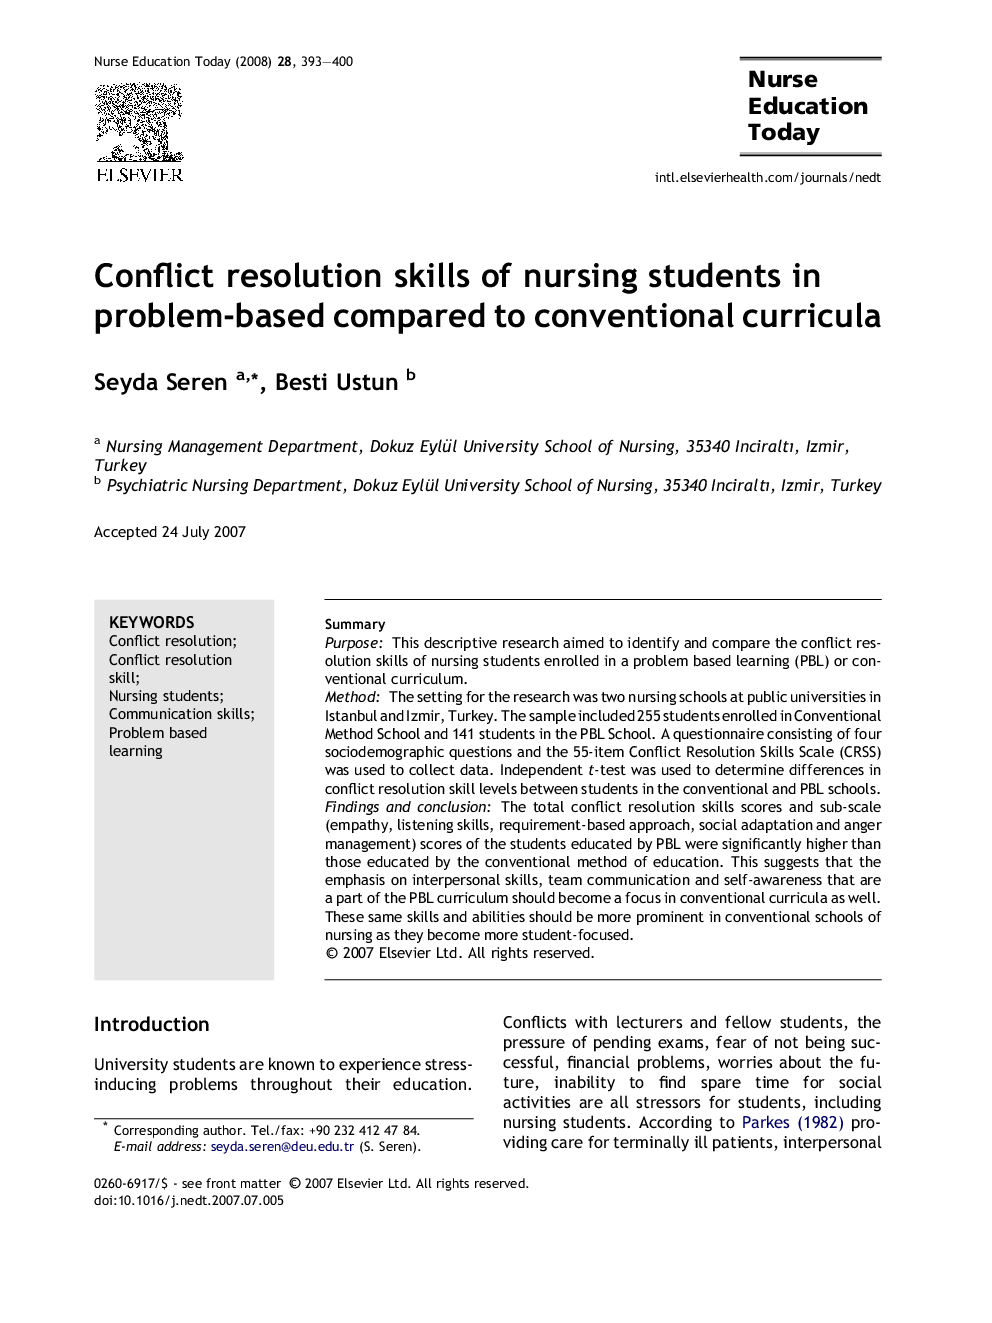 Conflict resolution skills of nursing students in problem-based compared to conventional curricula